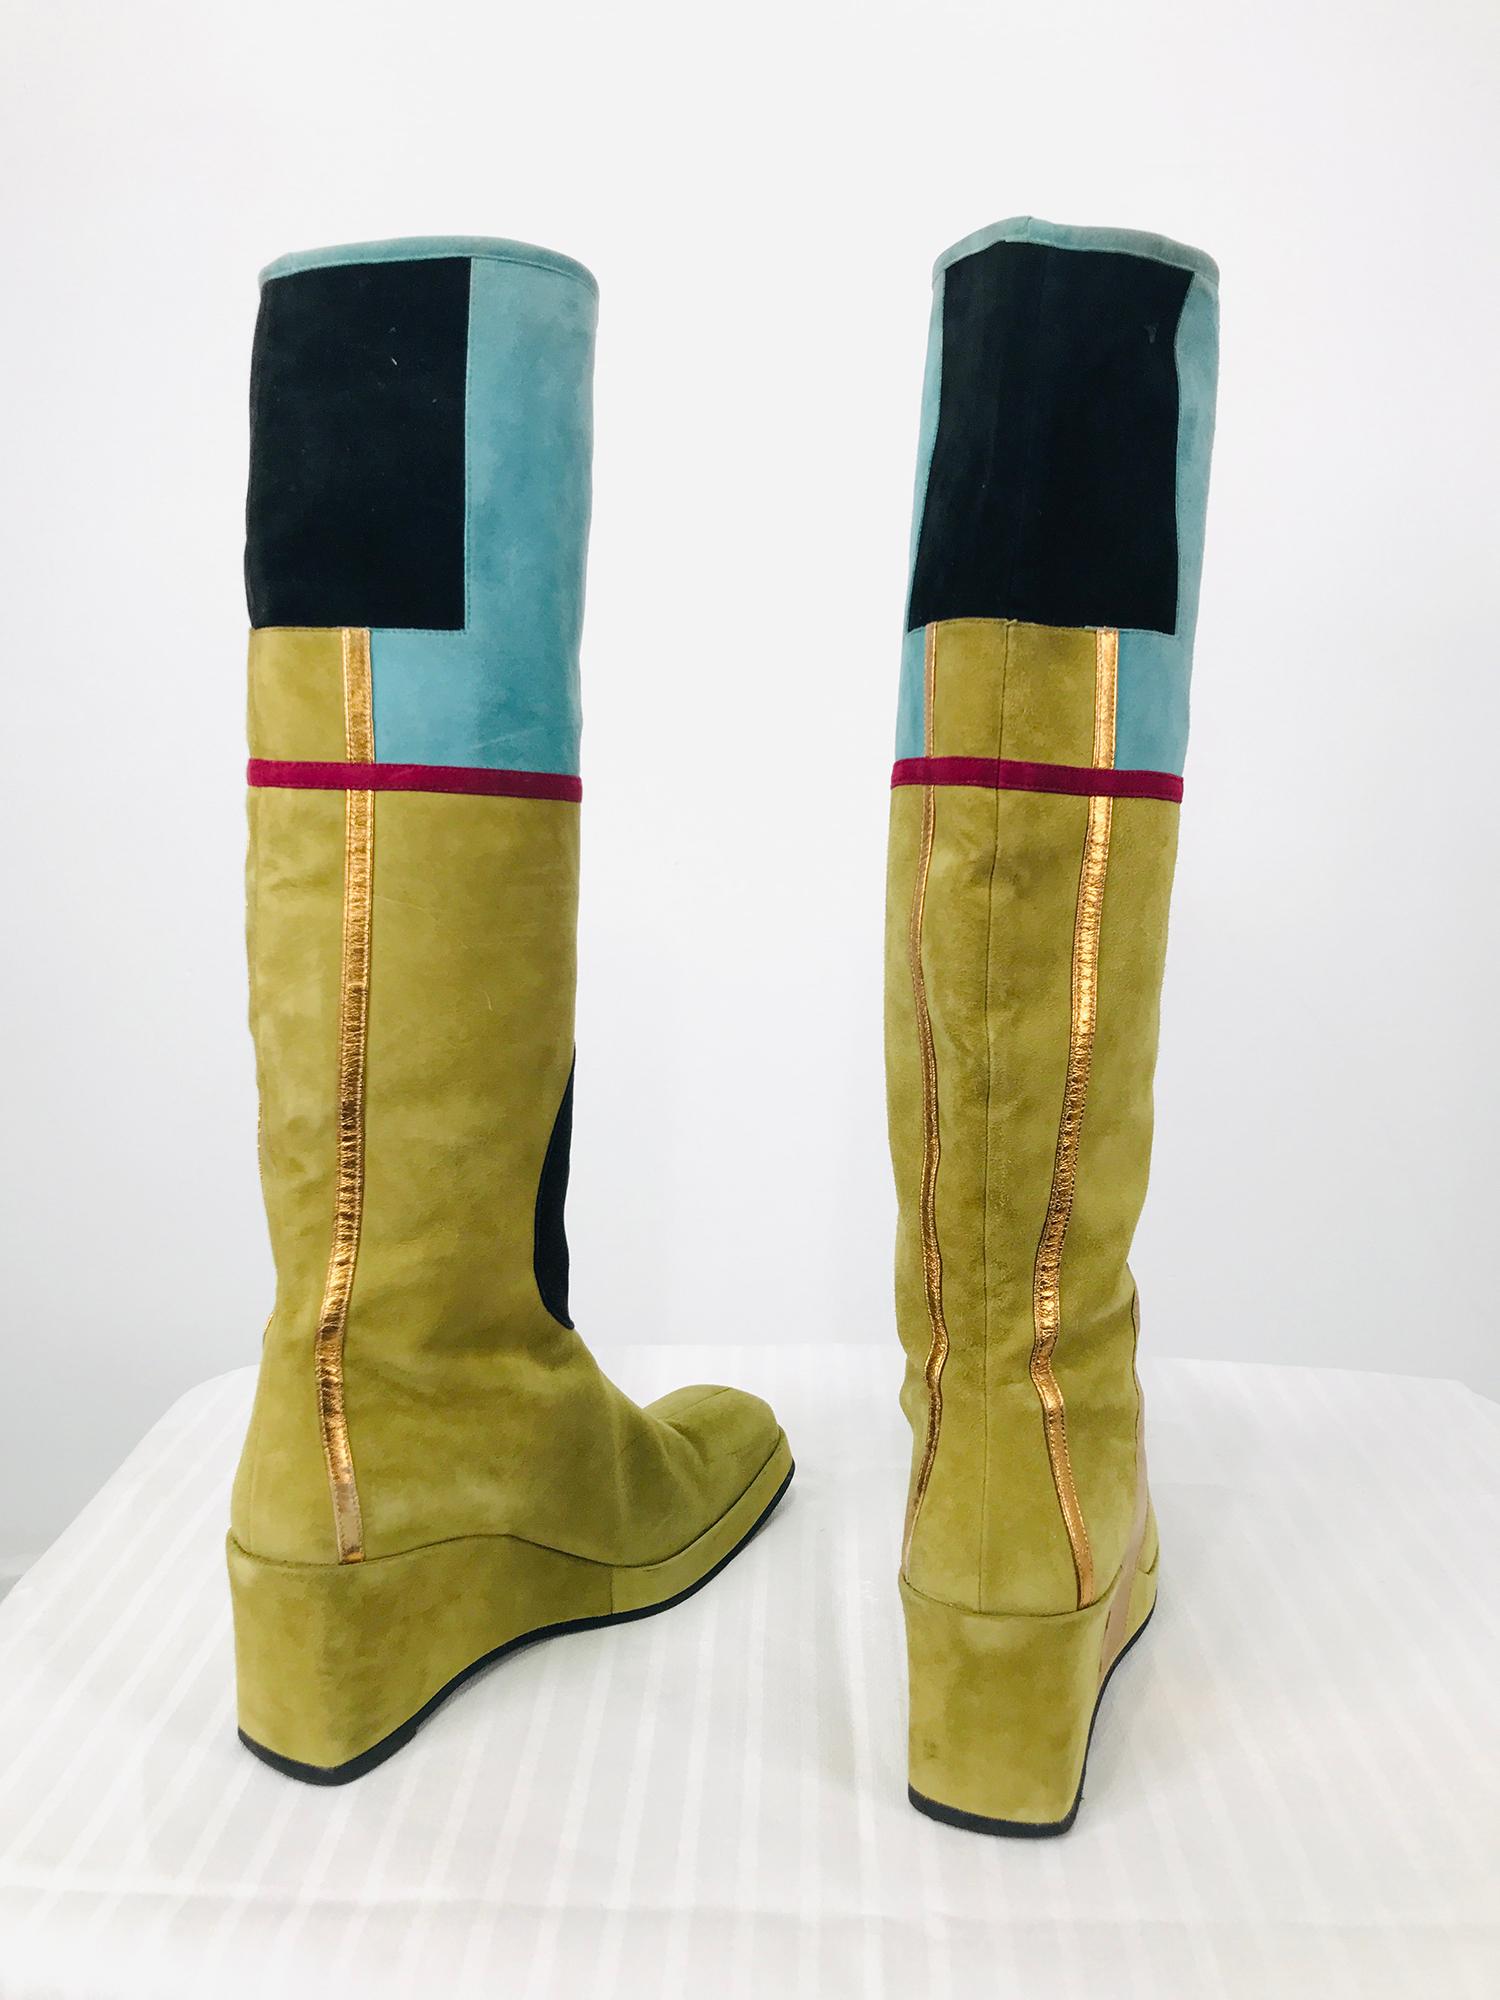 Charles Jourdan Multicolour Applique Suede & Leather Wedge Heel Boots In Good Condition In West Palm Beach, FL